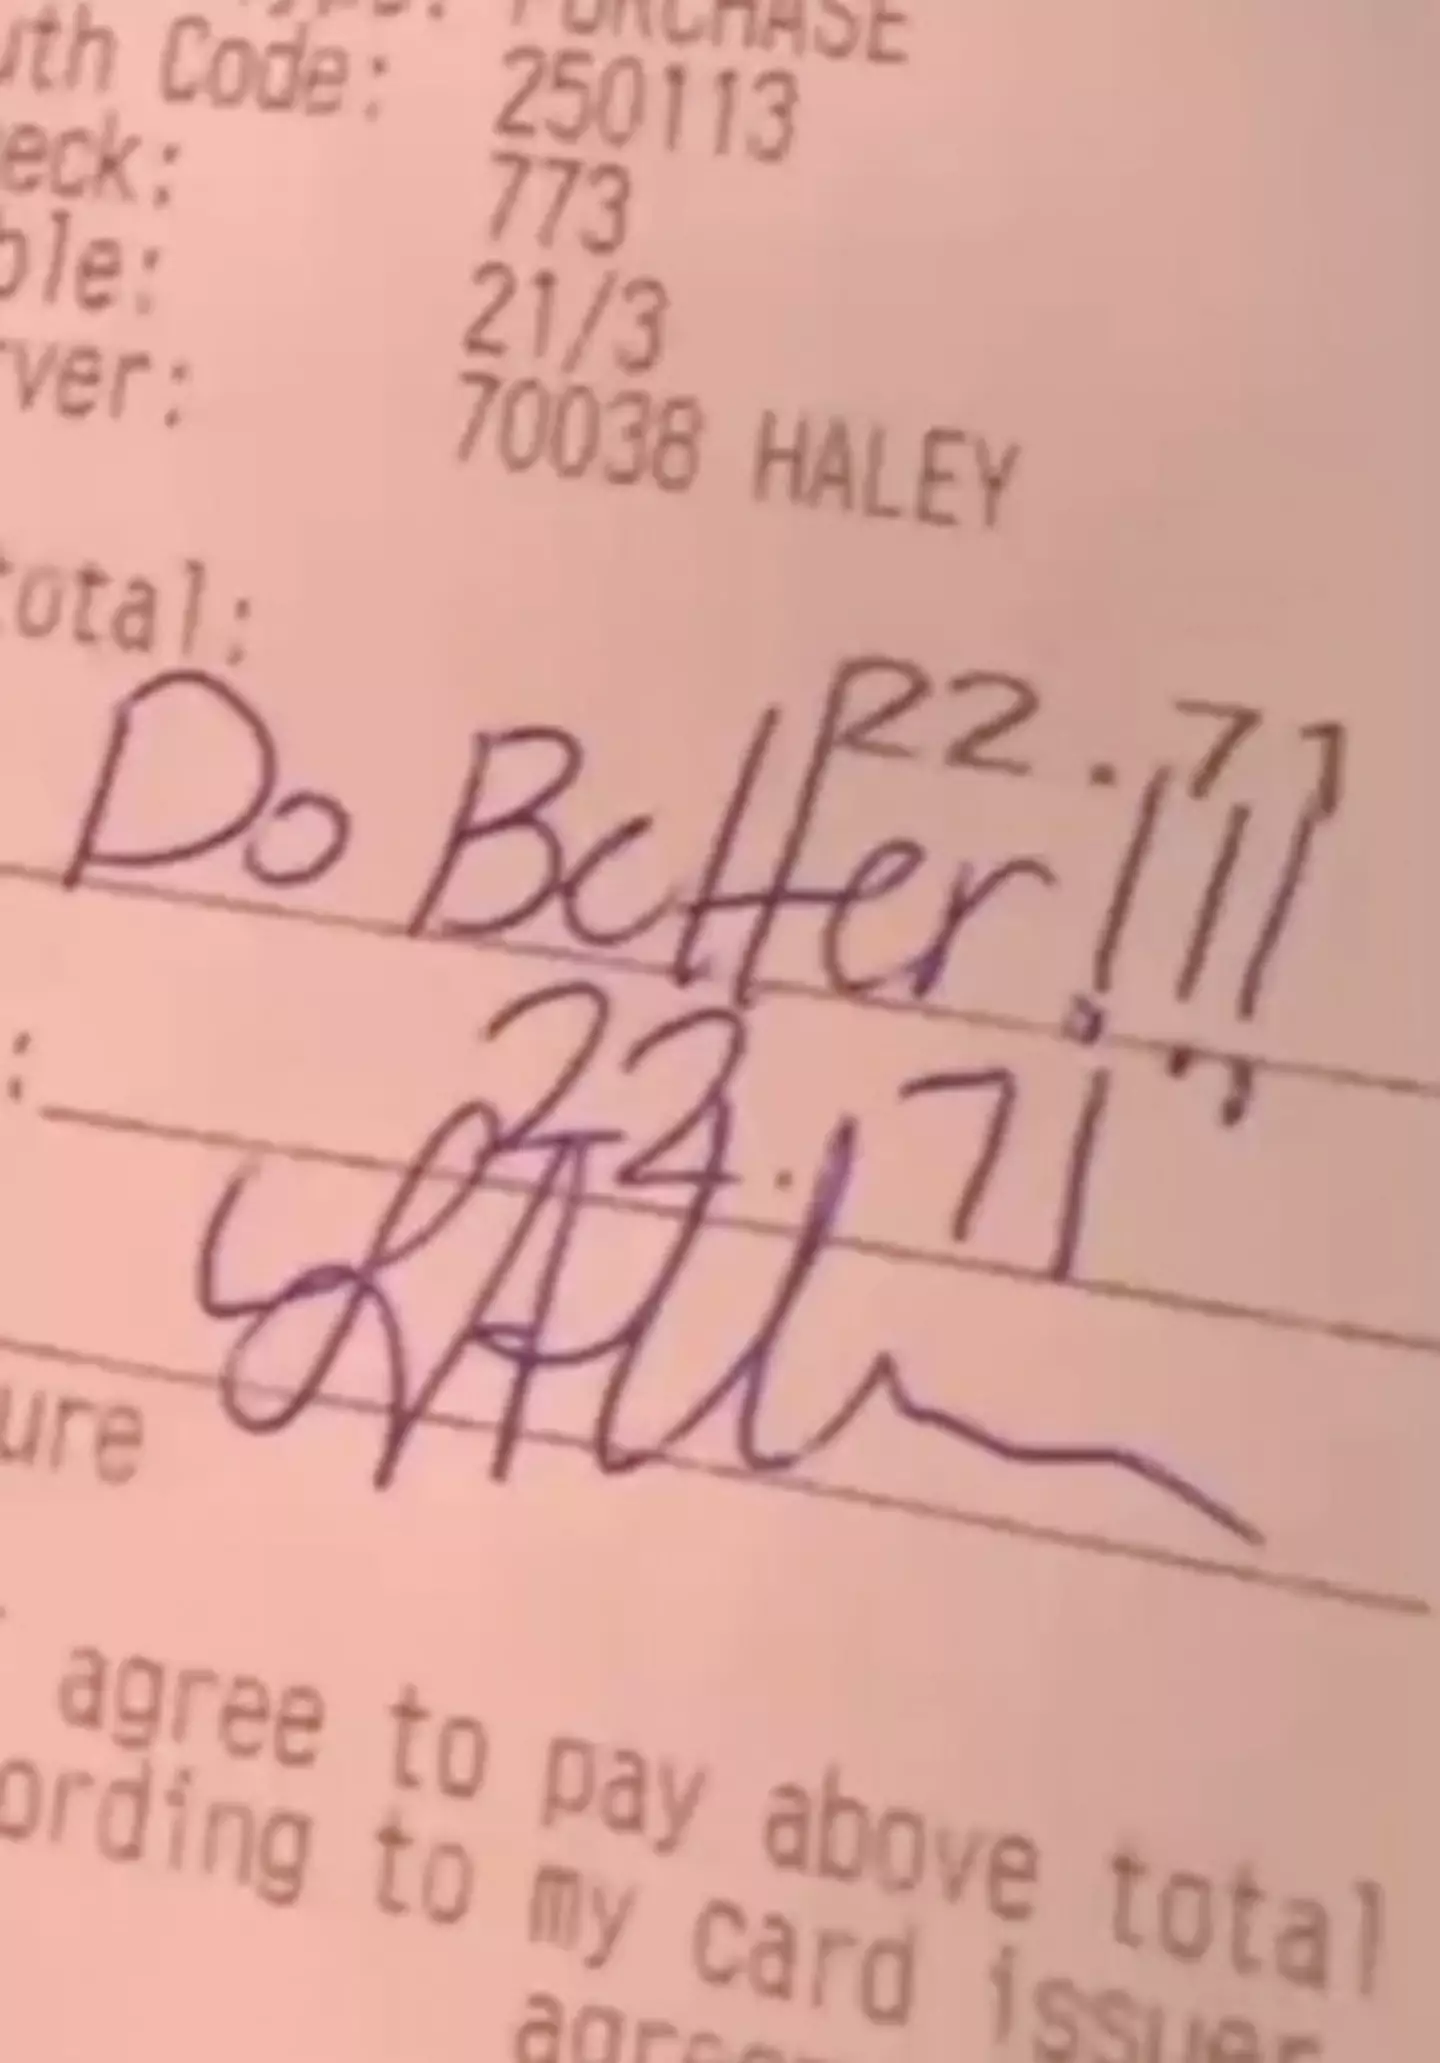 The woman refused to tip her waitress.